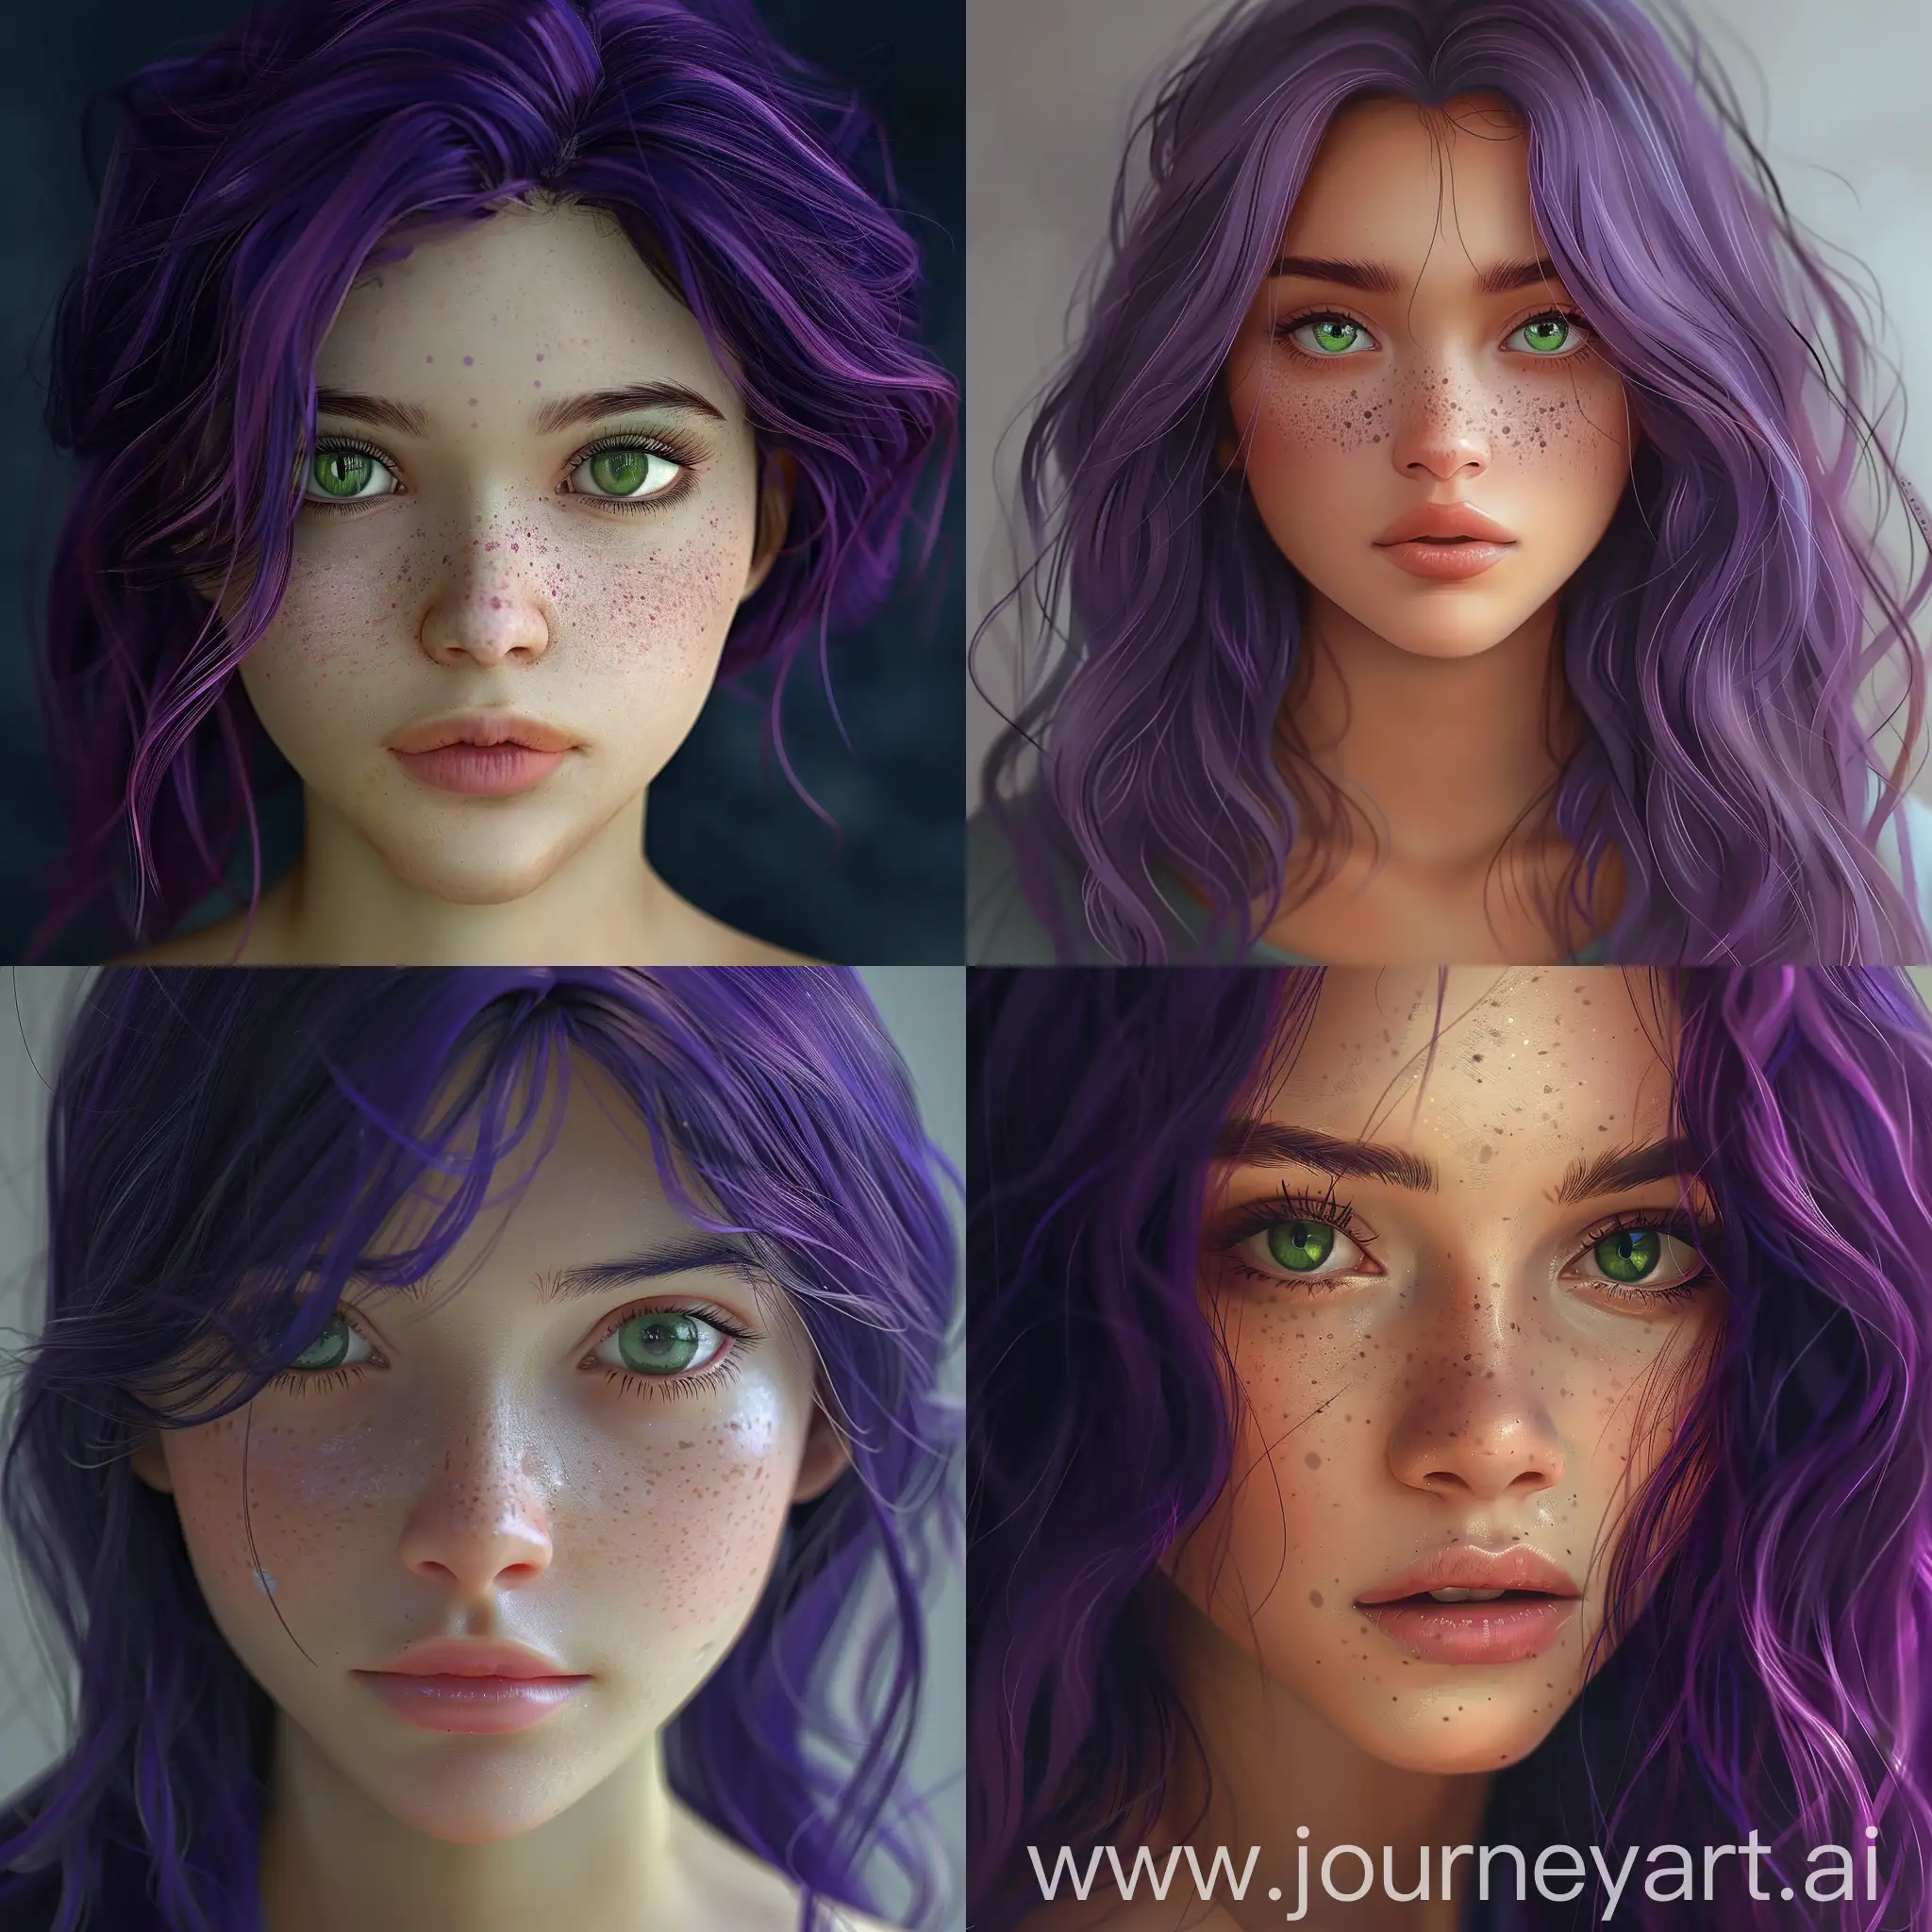 green eyes iranian girl with purple hair and round face 